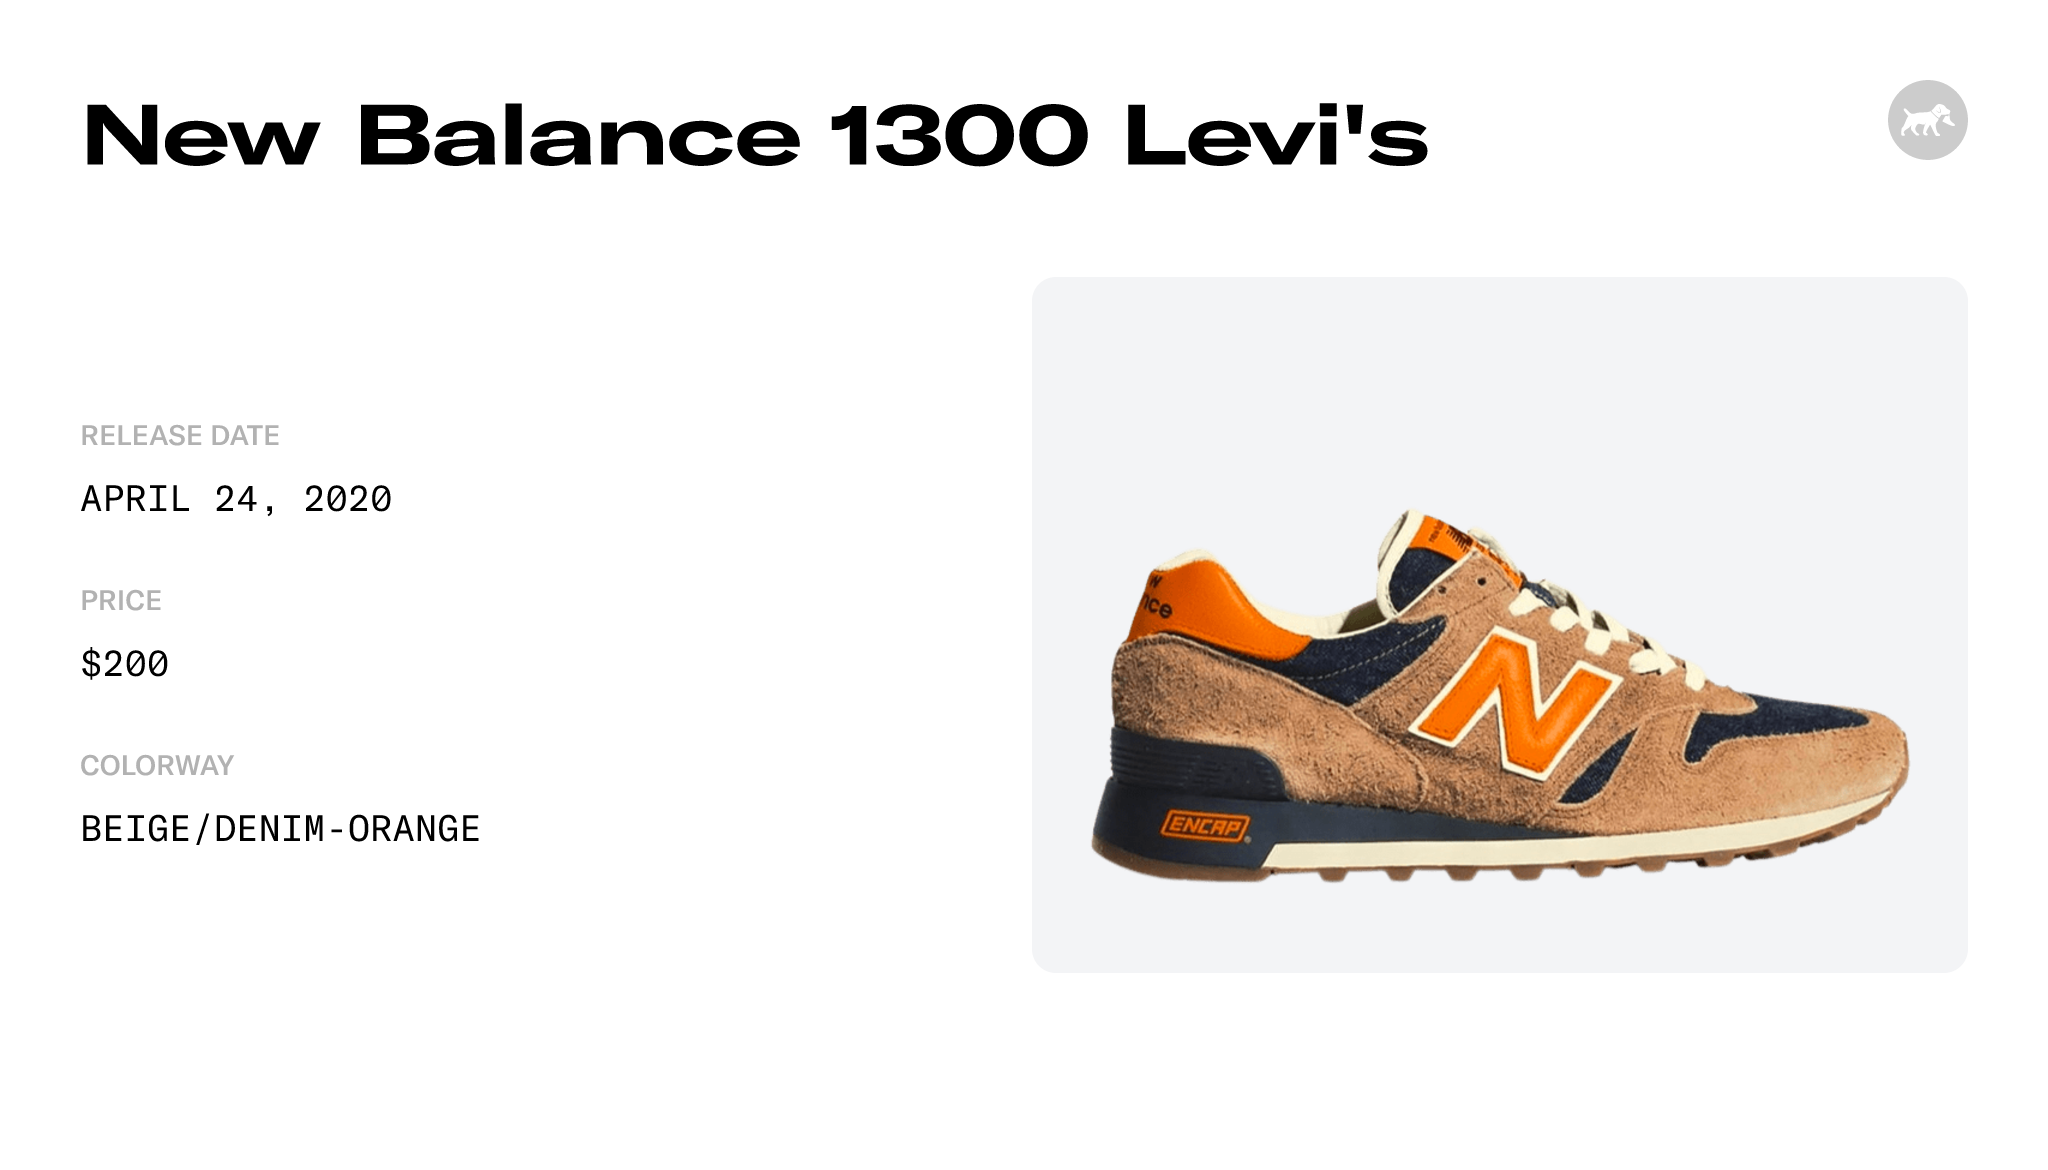 New Balance 1300 Levi's - M1300LV Raffles and Release Date